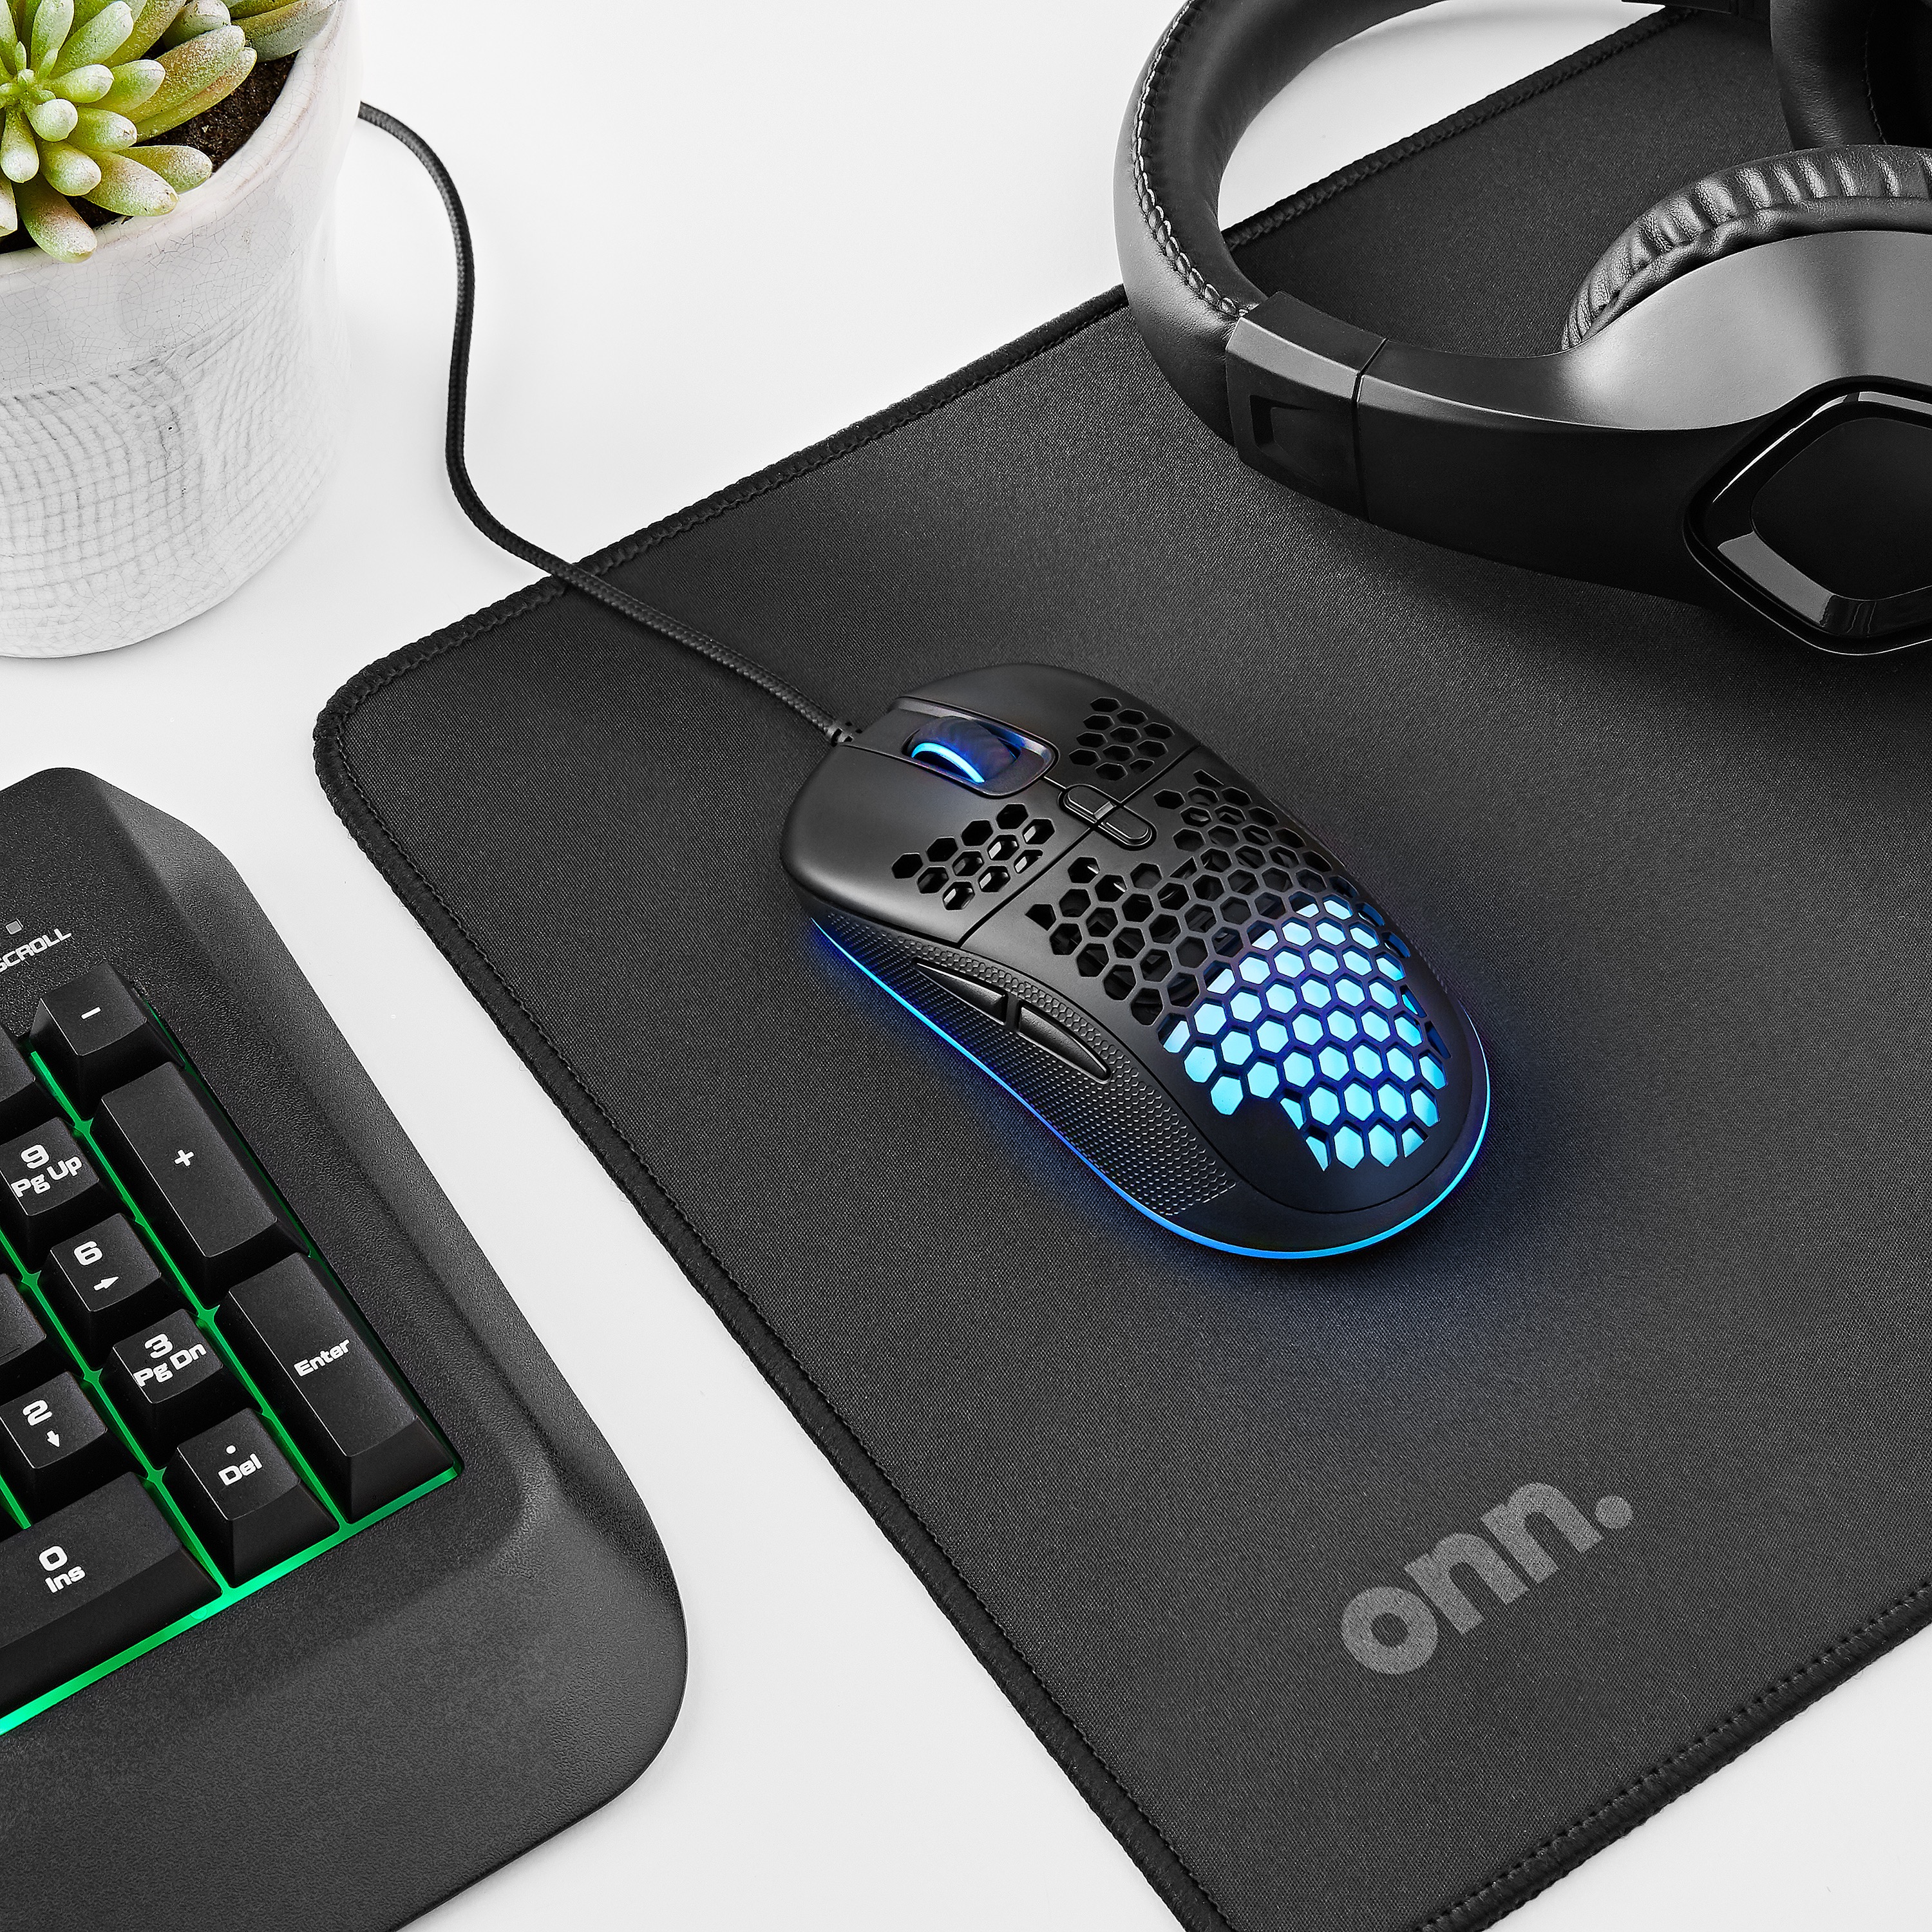 onn. Lightweight Gaming Mouse with LED Lighting and 7 Programmable Buttons, Adjustable 200-7200 DPI - image 2 of 13